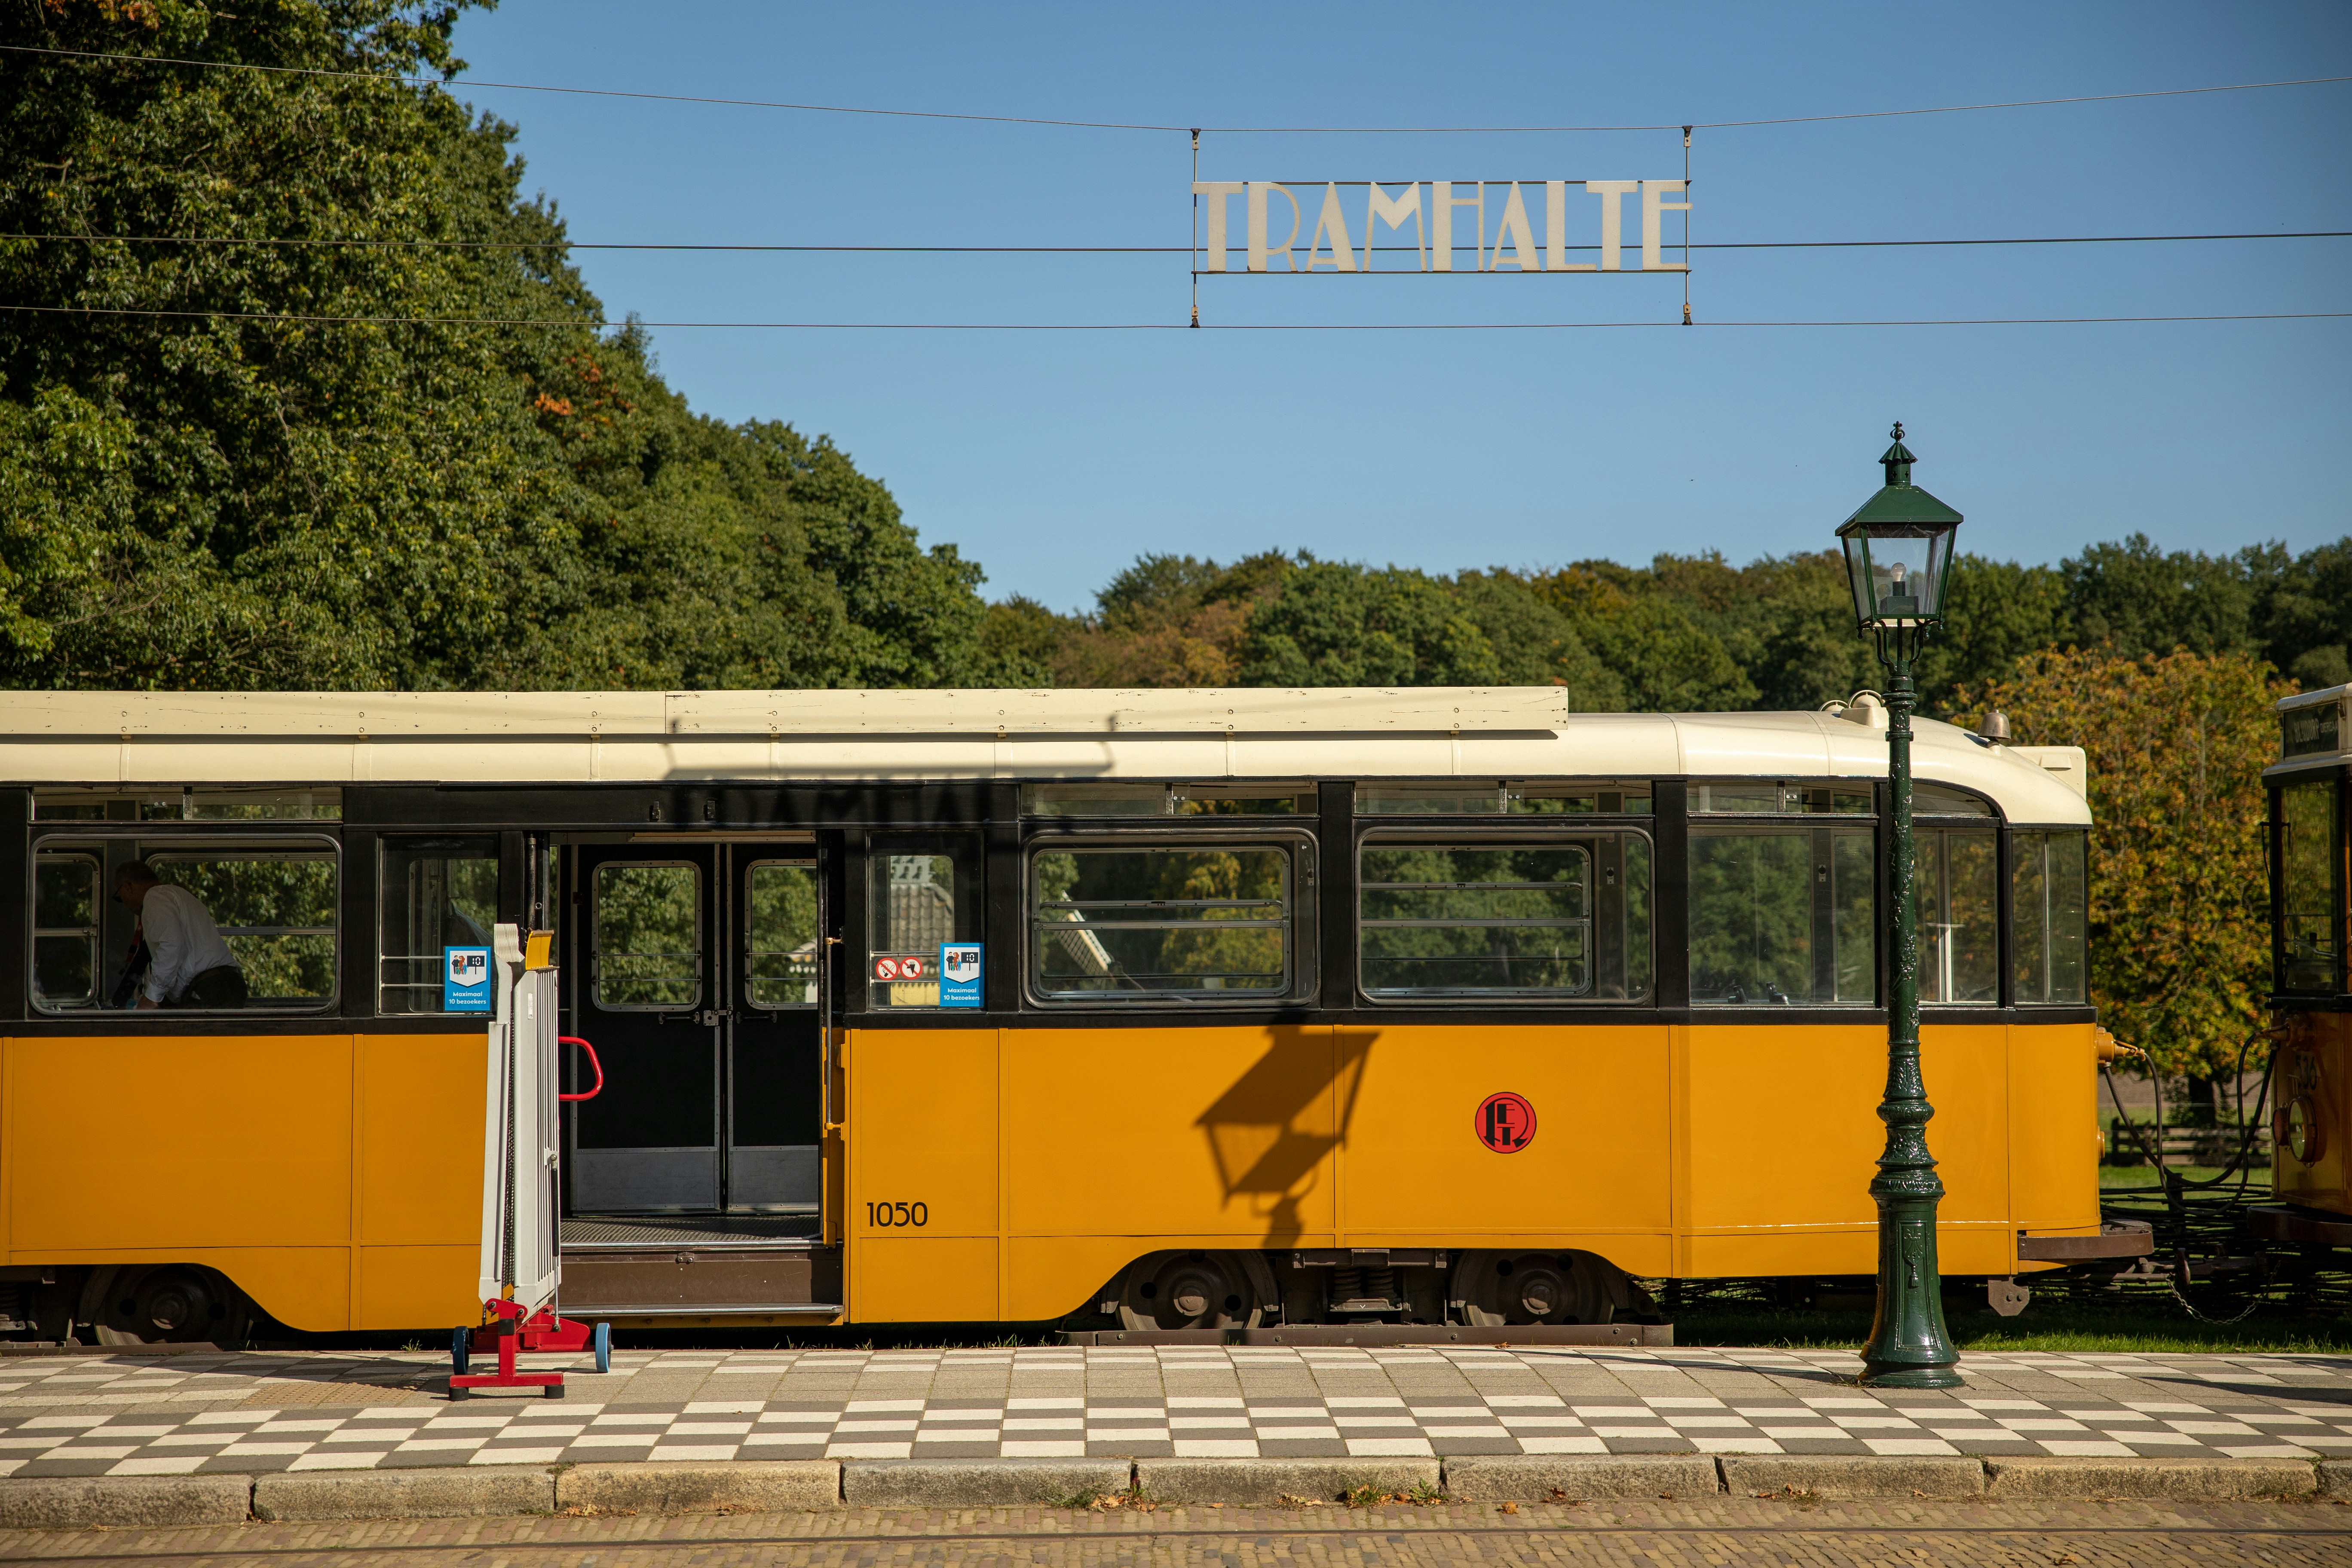 yellow and white tram on road during daytime